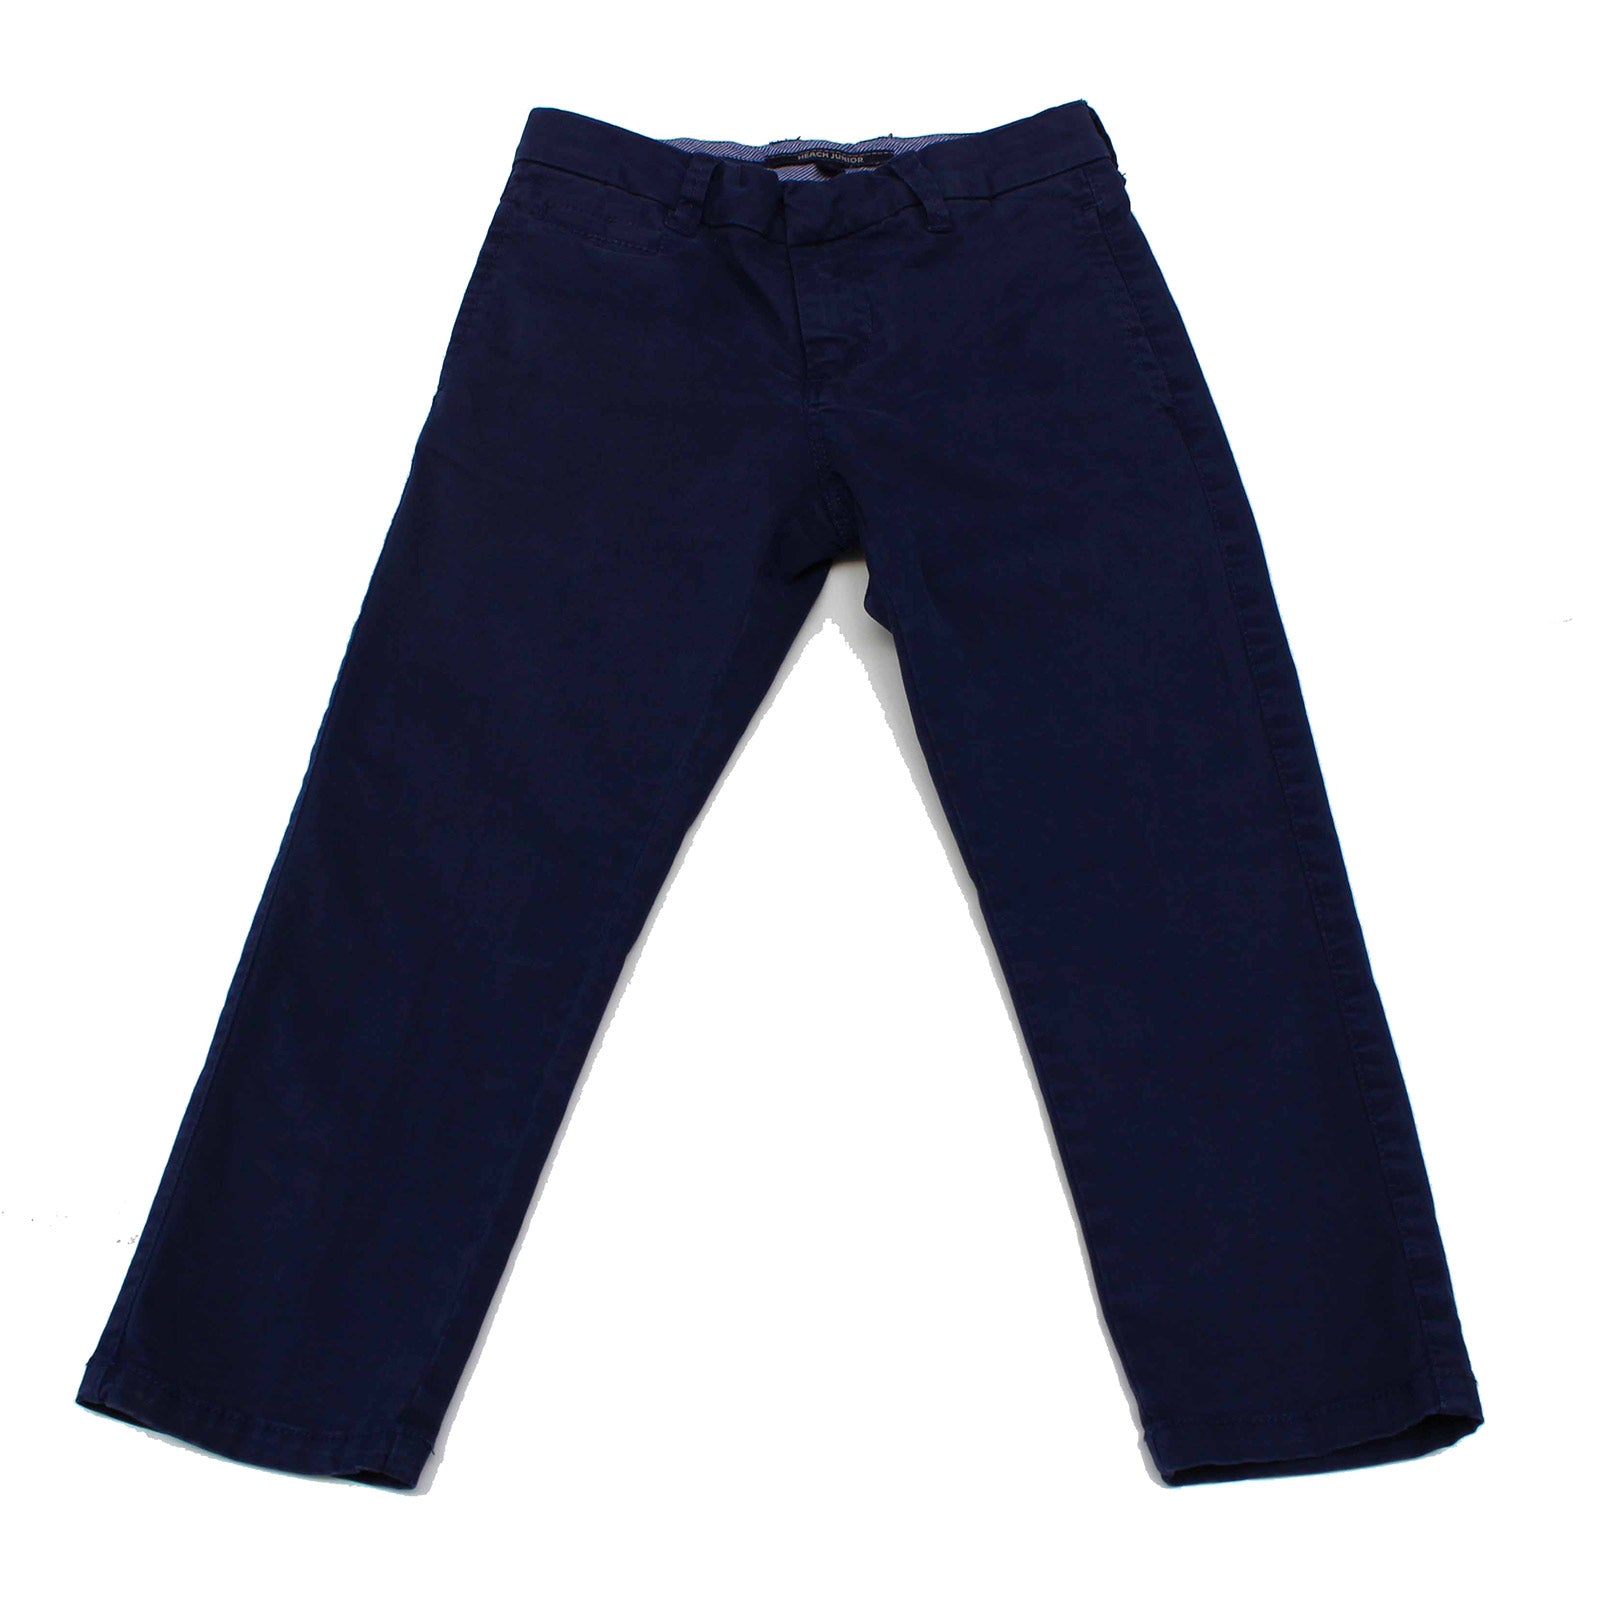 
  Long trousers from the Silvian Heach children's clothing line with welt pockets on the front a...